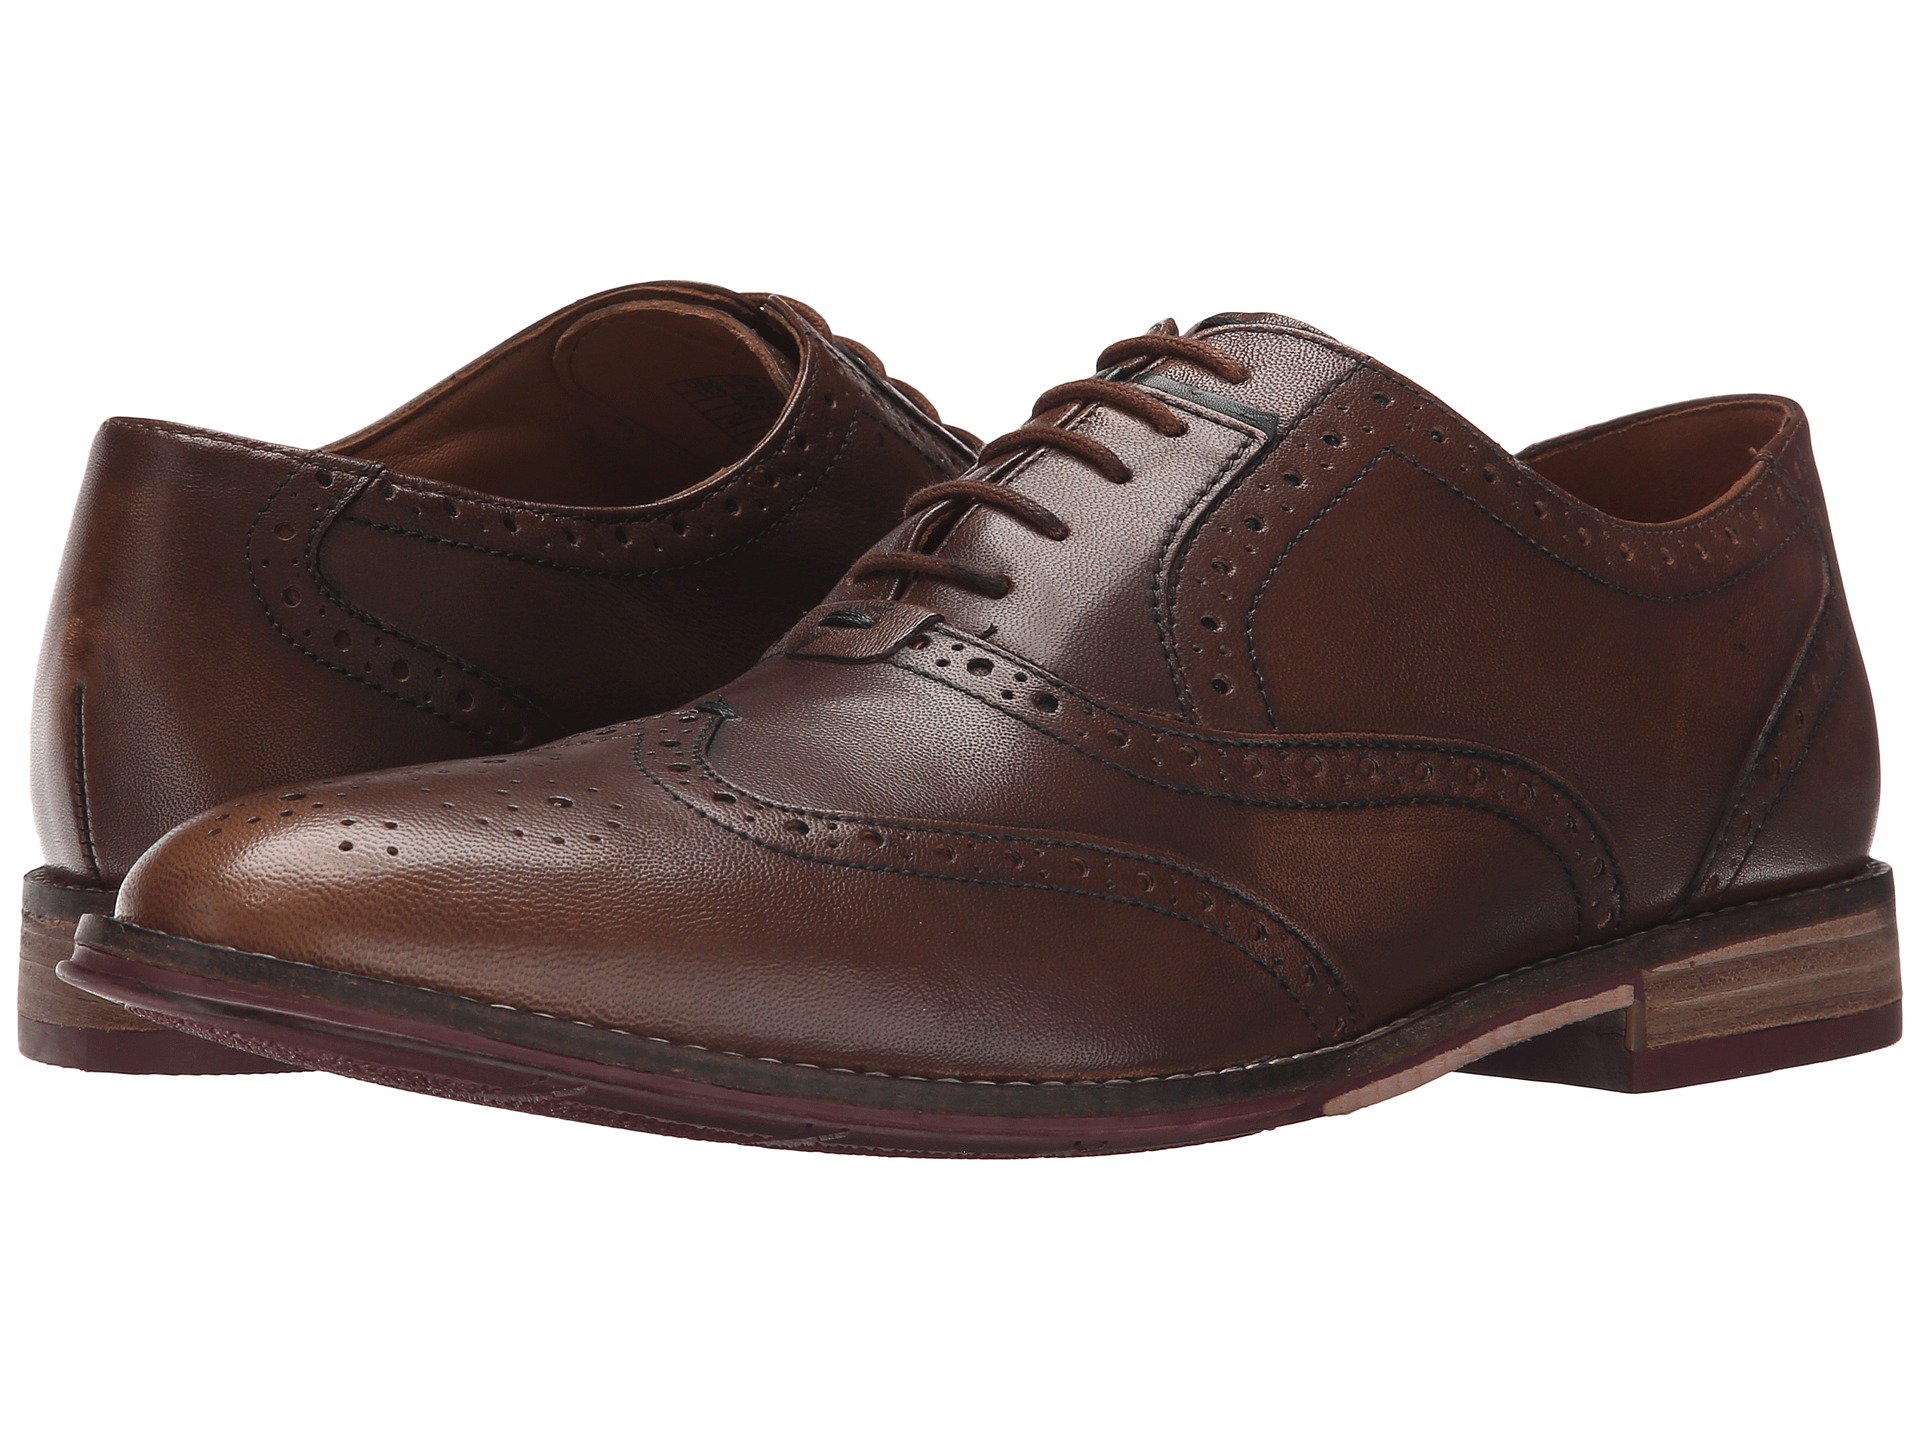 Hush Puppies Style Brogue Tan Leather